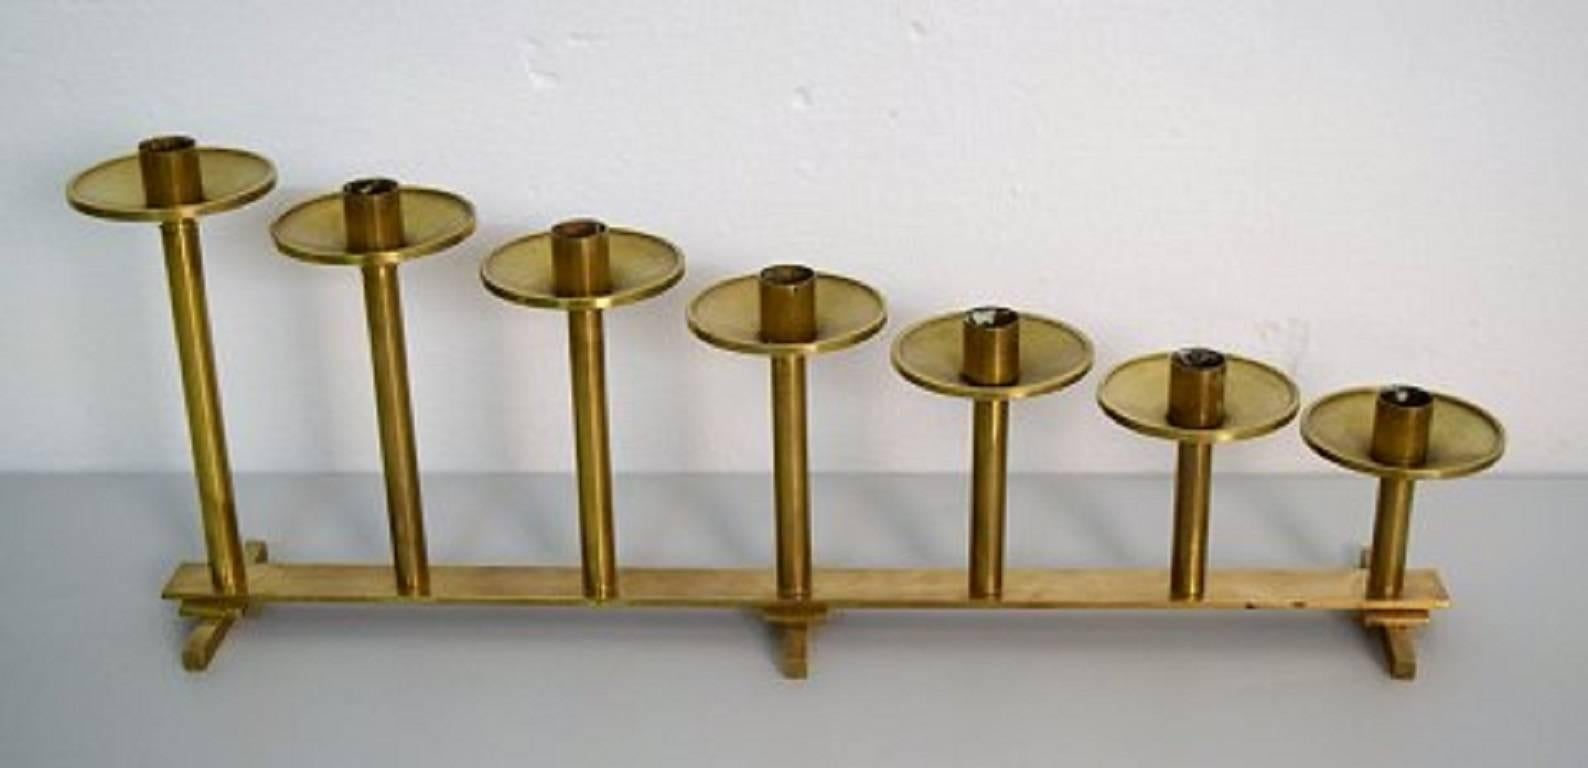 Large floor candlestick in brass for seven-light.
In perfect condition.
Measures 63 x 22 cm.